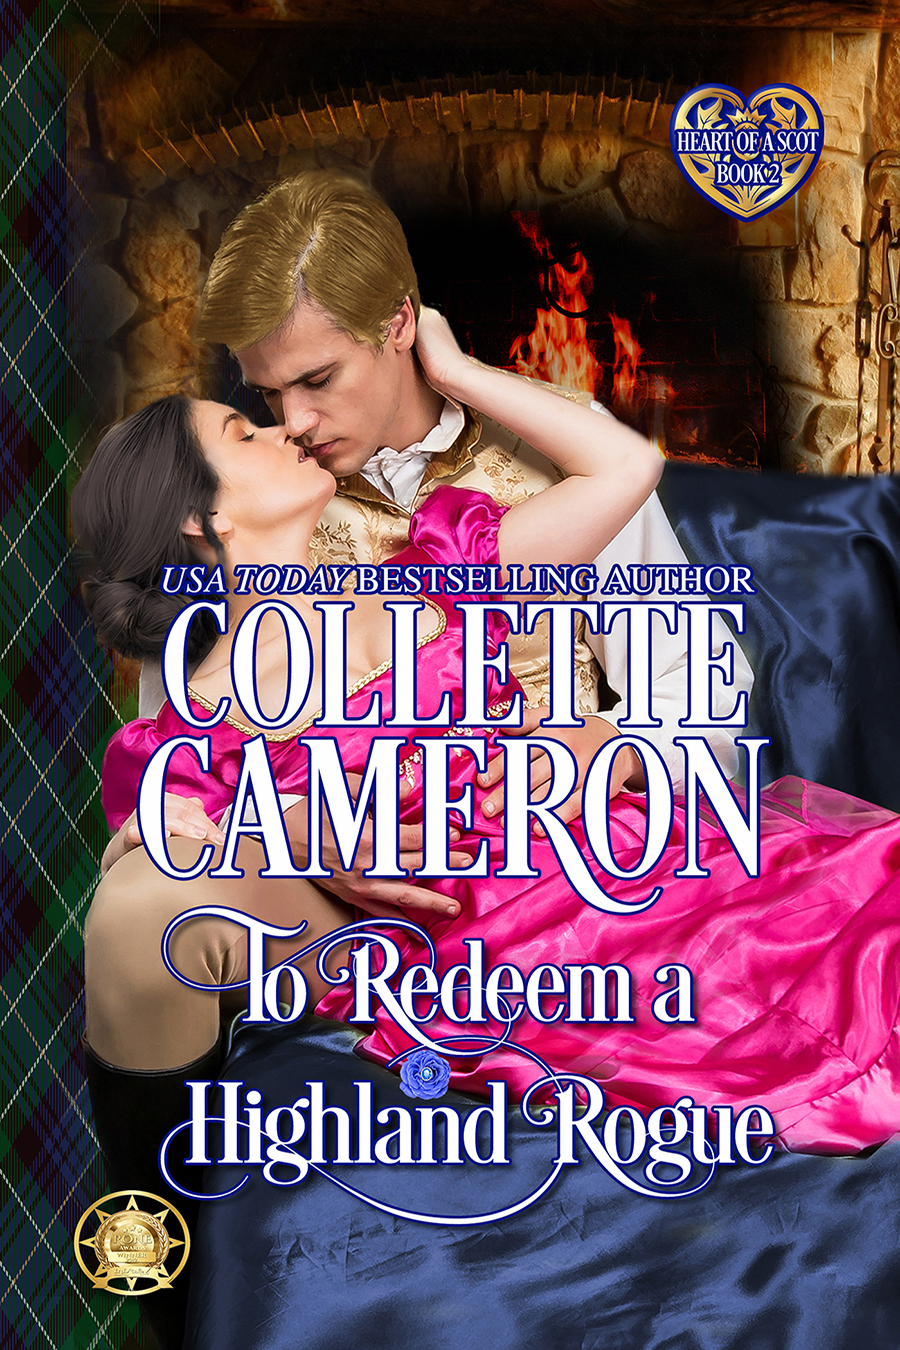 The rerelease of TO REDEEM A HIGHLAND ROGUE is here!